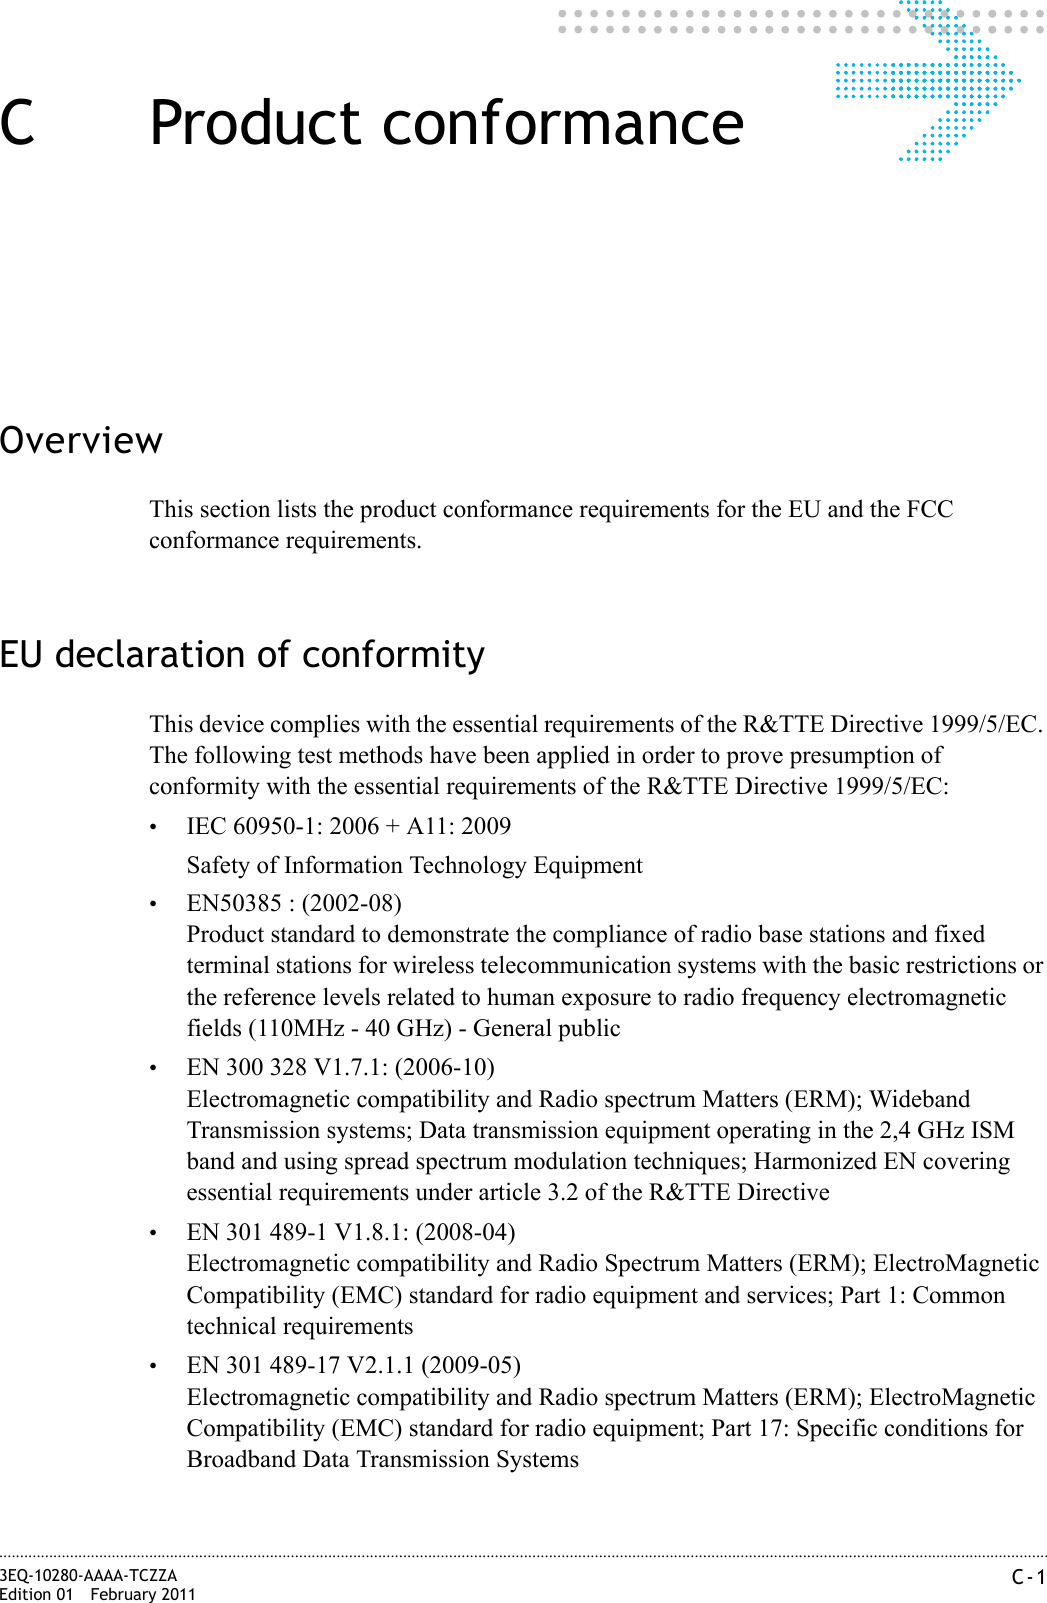 C-13EQ-10280-AAAA-TCZZAEdition 01 February 2011............................................................................................................................................................................................................................................................C Product conformanceOverviewThis section lists the product conformance requirements for the EU and the FCC conformance requirements.EU declaration of conformityThis device complies with the essential requirements of the R&amp;TTE Directive 1999/5/EC. The following test methods have been applied in order to prove presumption of conformity with the essential requirements of the R&amp;TTE Directive 1999/5/EC:•IEC 60950-1: 2006 + A11: 2009Safety of Information Technology Equipment•EN50385 : (2002-08)Product standard to demonstrate the compliance of radio base stations and fixed terminal stations for wireless telecommunication systems with the basic restrictions or the reference levels related to human exposure to radio frequency electromagnetic fields (110MHz - 40 GHz) - General public•EN 300 328 V1.7.1: (2006-10)Electromagnetic compatibility and Radio spectrum Matters (ERM); Wideband Transmission systems; Data transmission equipment operating in the 2,4 GHz ISM band and using spread spectrum modulation techniques; Harmonized EN covering essential requirements under article 3.2 of the R&amp;TTE Directive•EN 301 489-1 V1.8.1: (2008-04)Electromagnetic compatibility and Radio Spectrum Matters (ERM); ElectroMagnetic Compatibility (EMC) standard for radio equipment and services; Part 1: Common technical requirements•EN 301 489-17 V2.1.1 (2009-05)Electromagnetic compatibility and Radio spectrum Matters (ERM); ElectroMagnetic Compatibility (EMC) standard for radio equipment; Part 17: Specific conditions for Broadband Data Transmission Systems